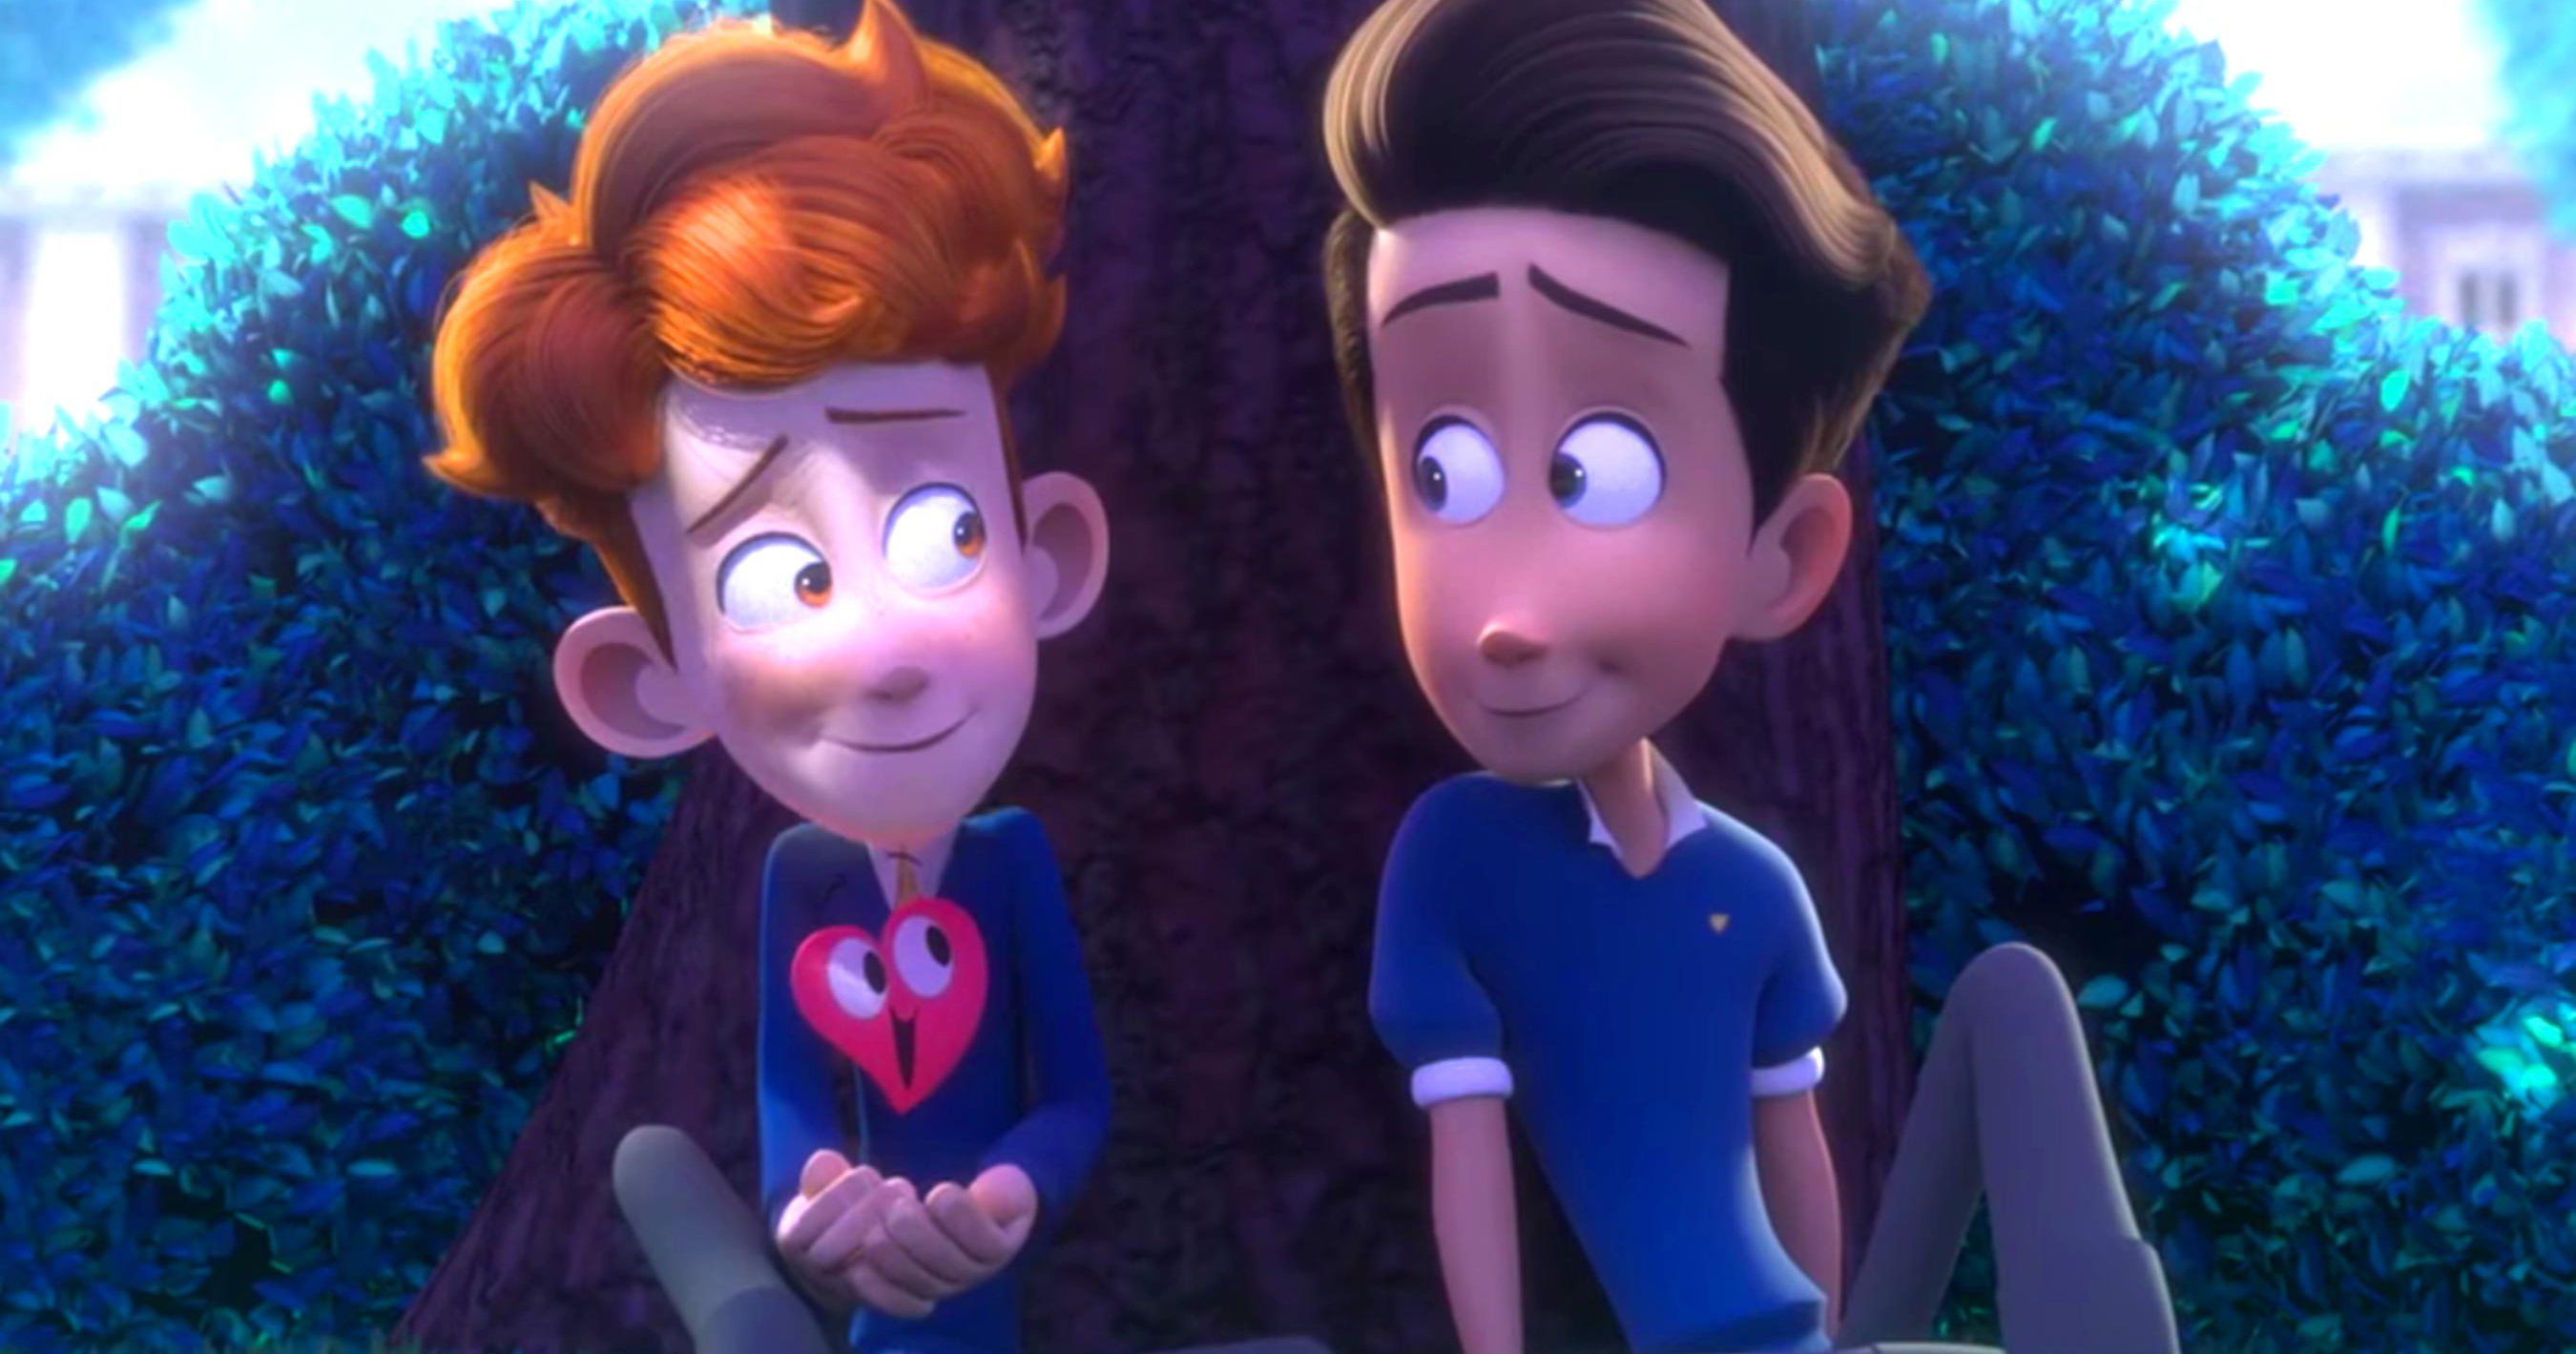 This heartwarming animated short movie about a gay crush is winning the internet